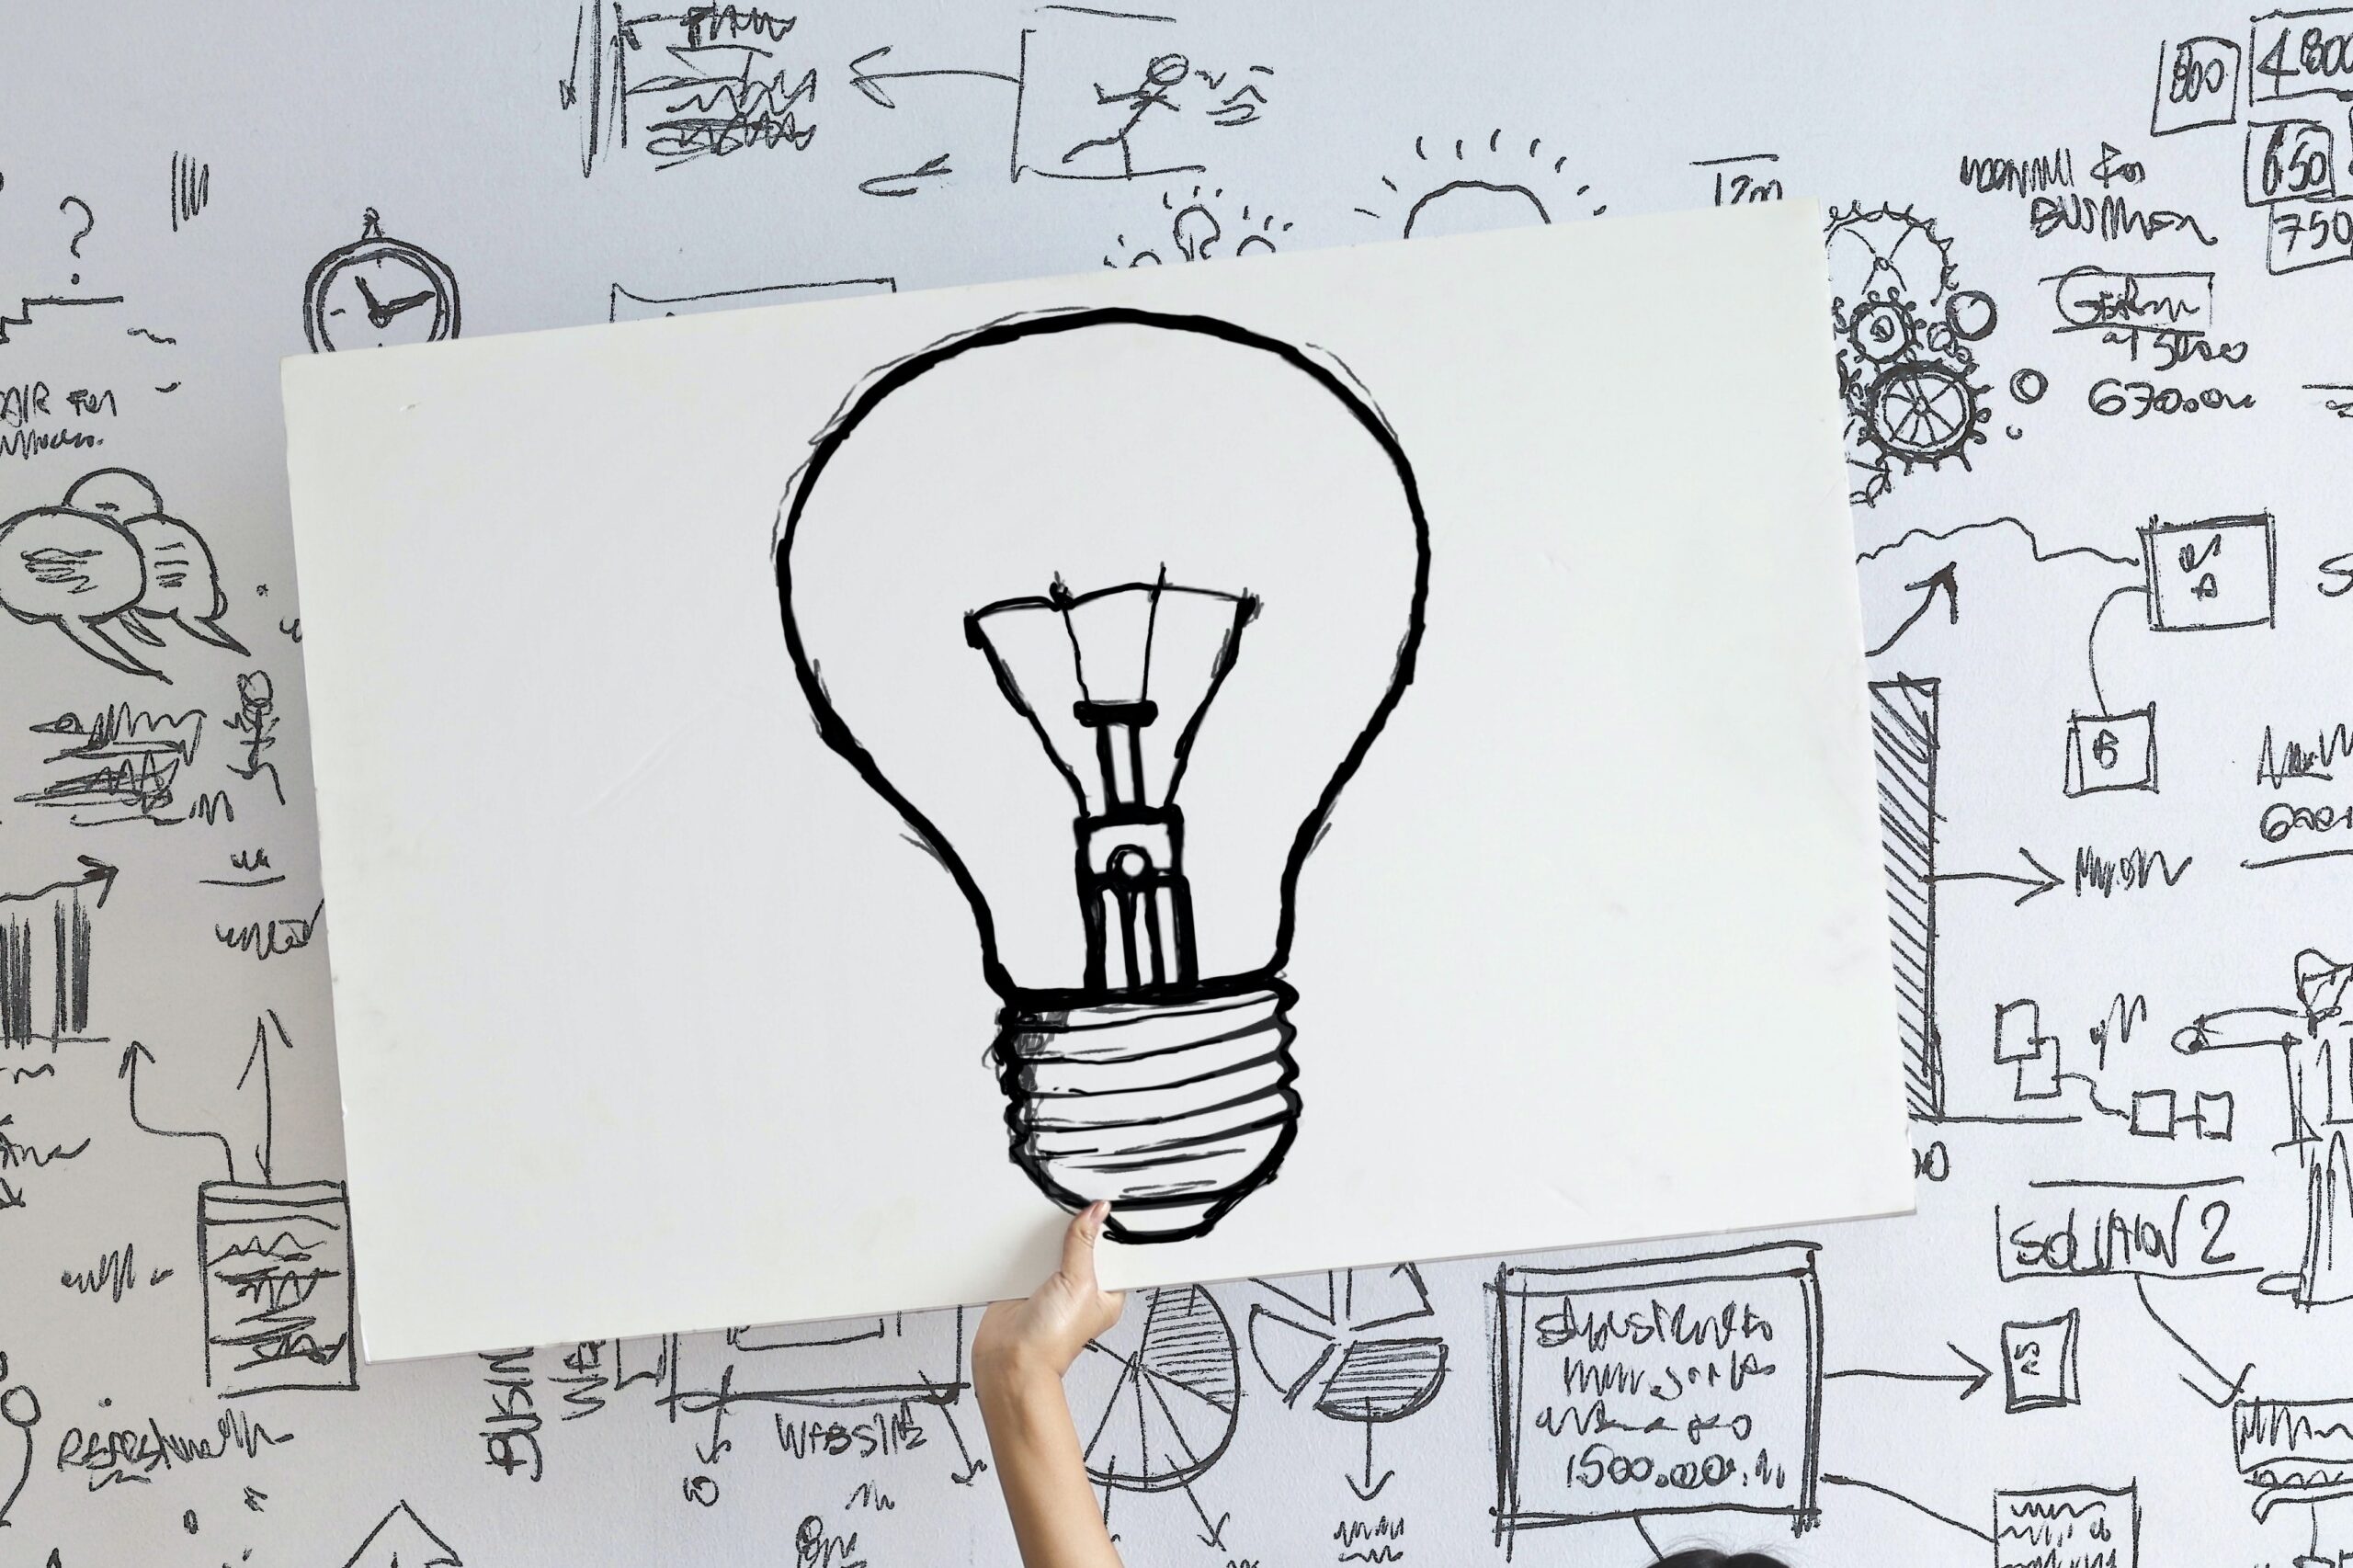 Defining your business idea